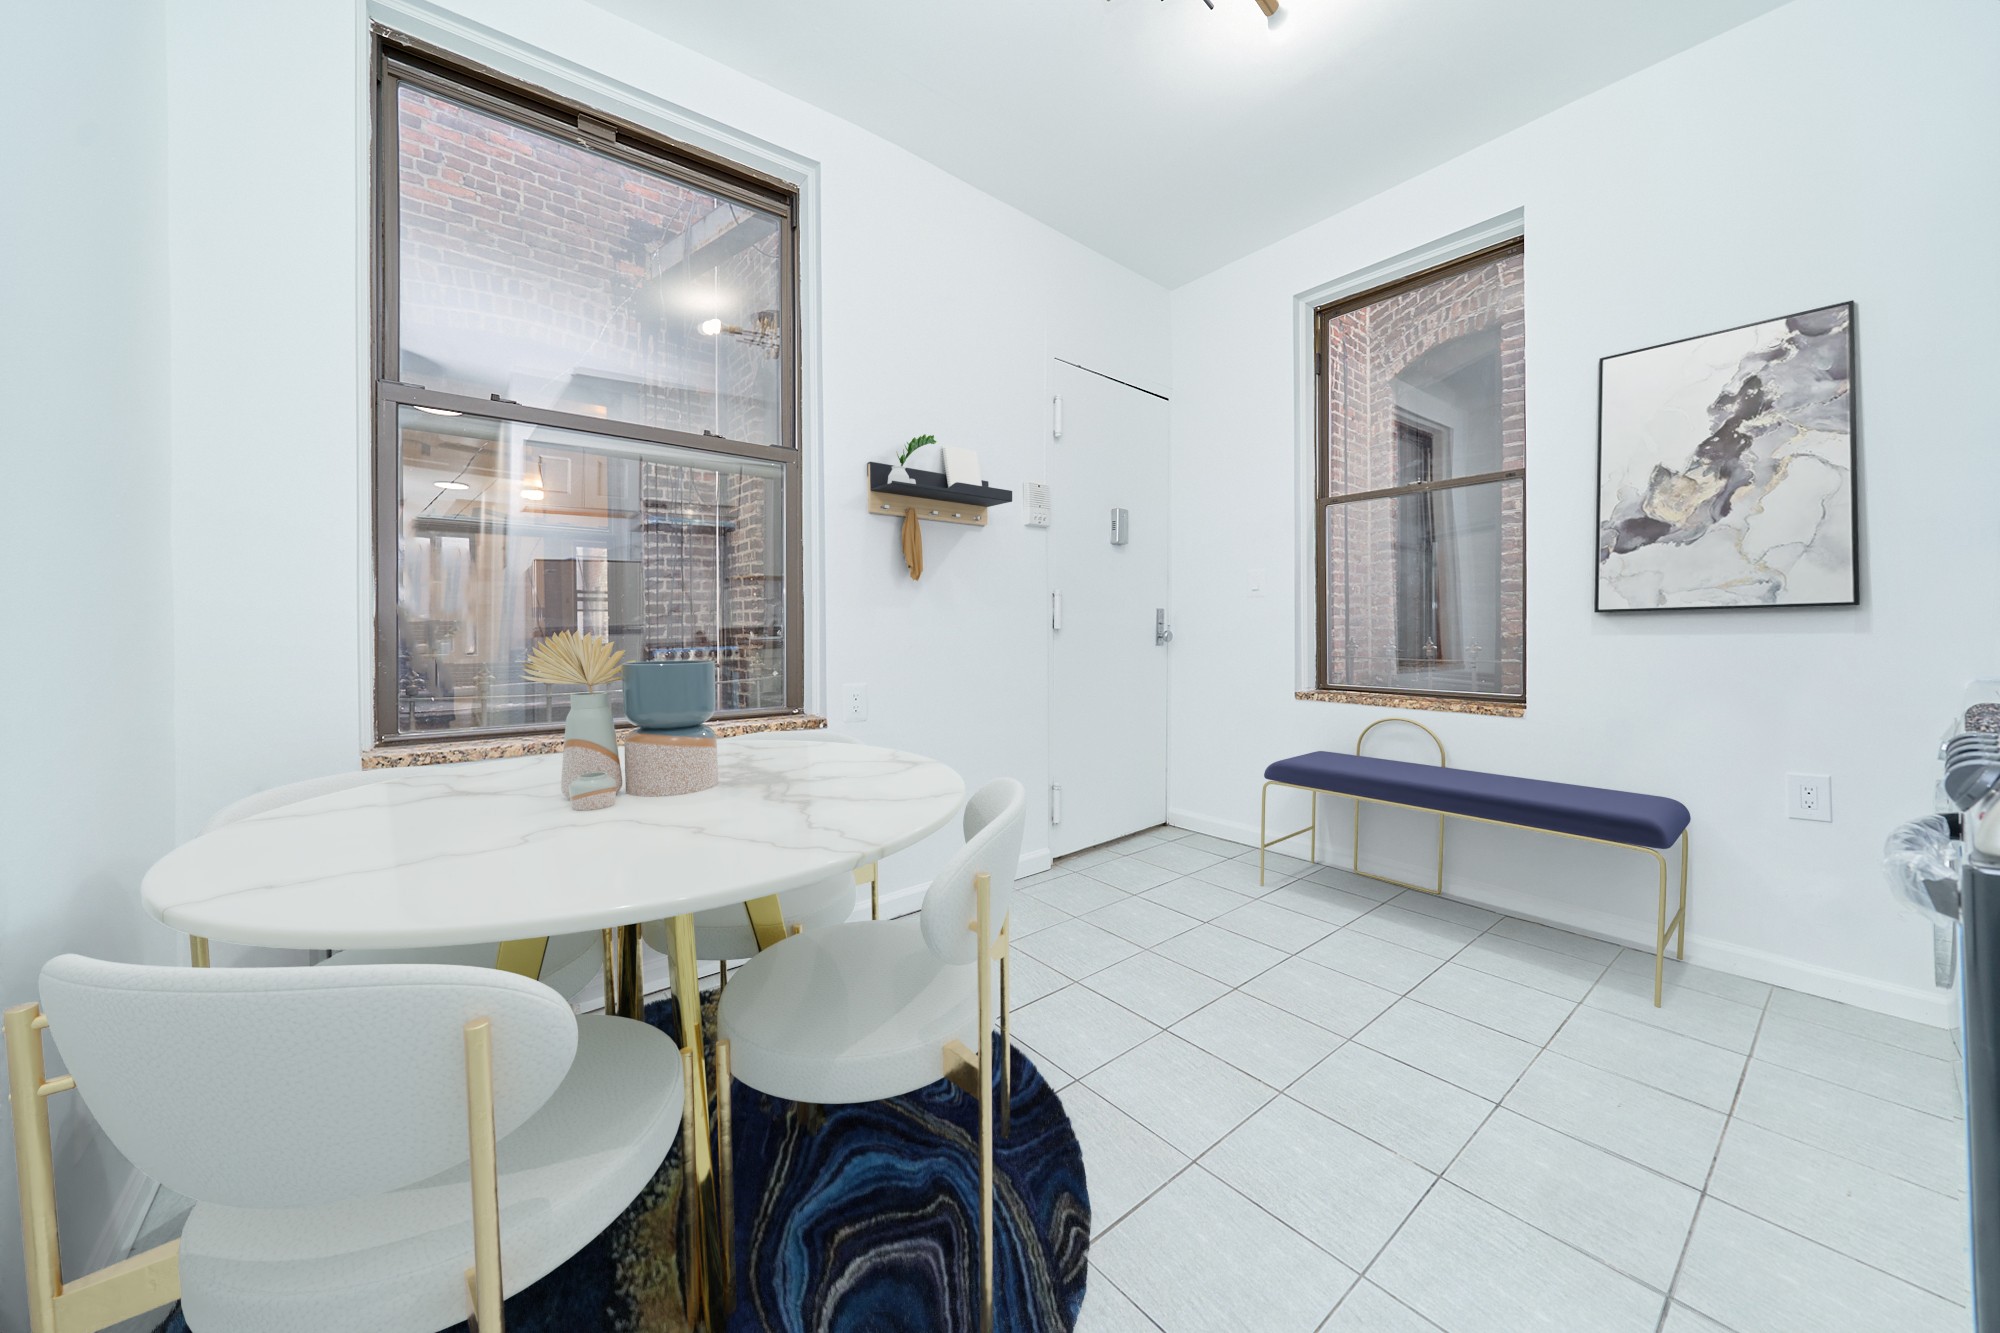 109 Ludlow Street 24, Lower East Side, Downtown, NYC - 3 Bedrooms  
3 Bathrooms  
5 Rooms - 